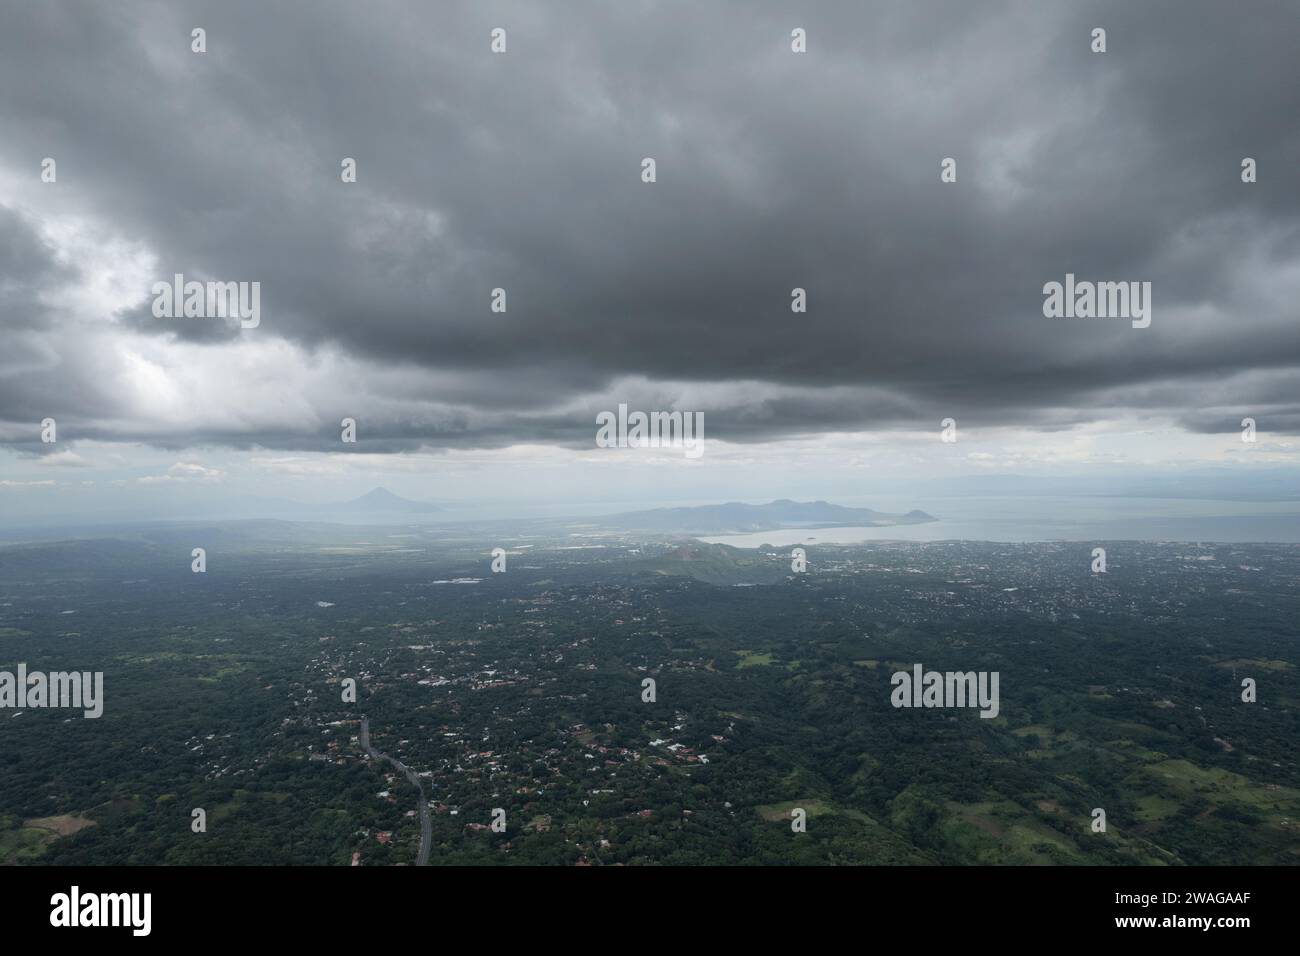 Central america landscape under rain clouds aerial drone view Stock Photo